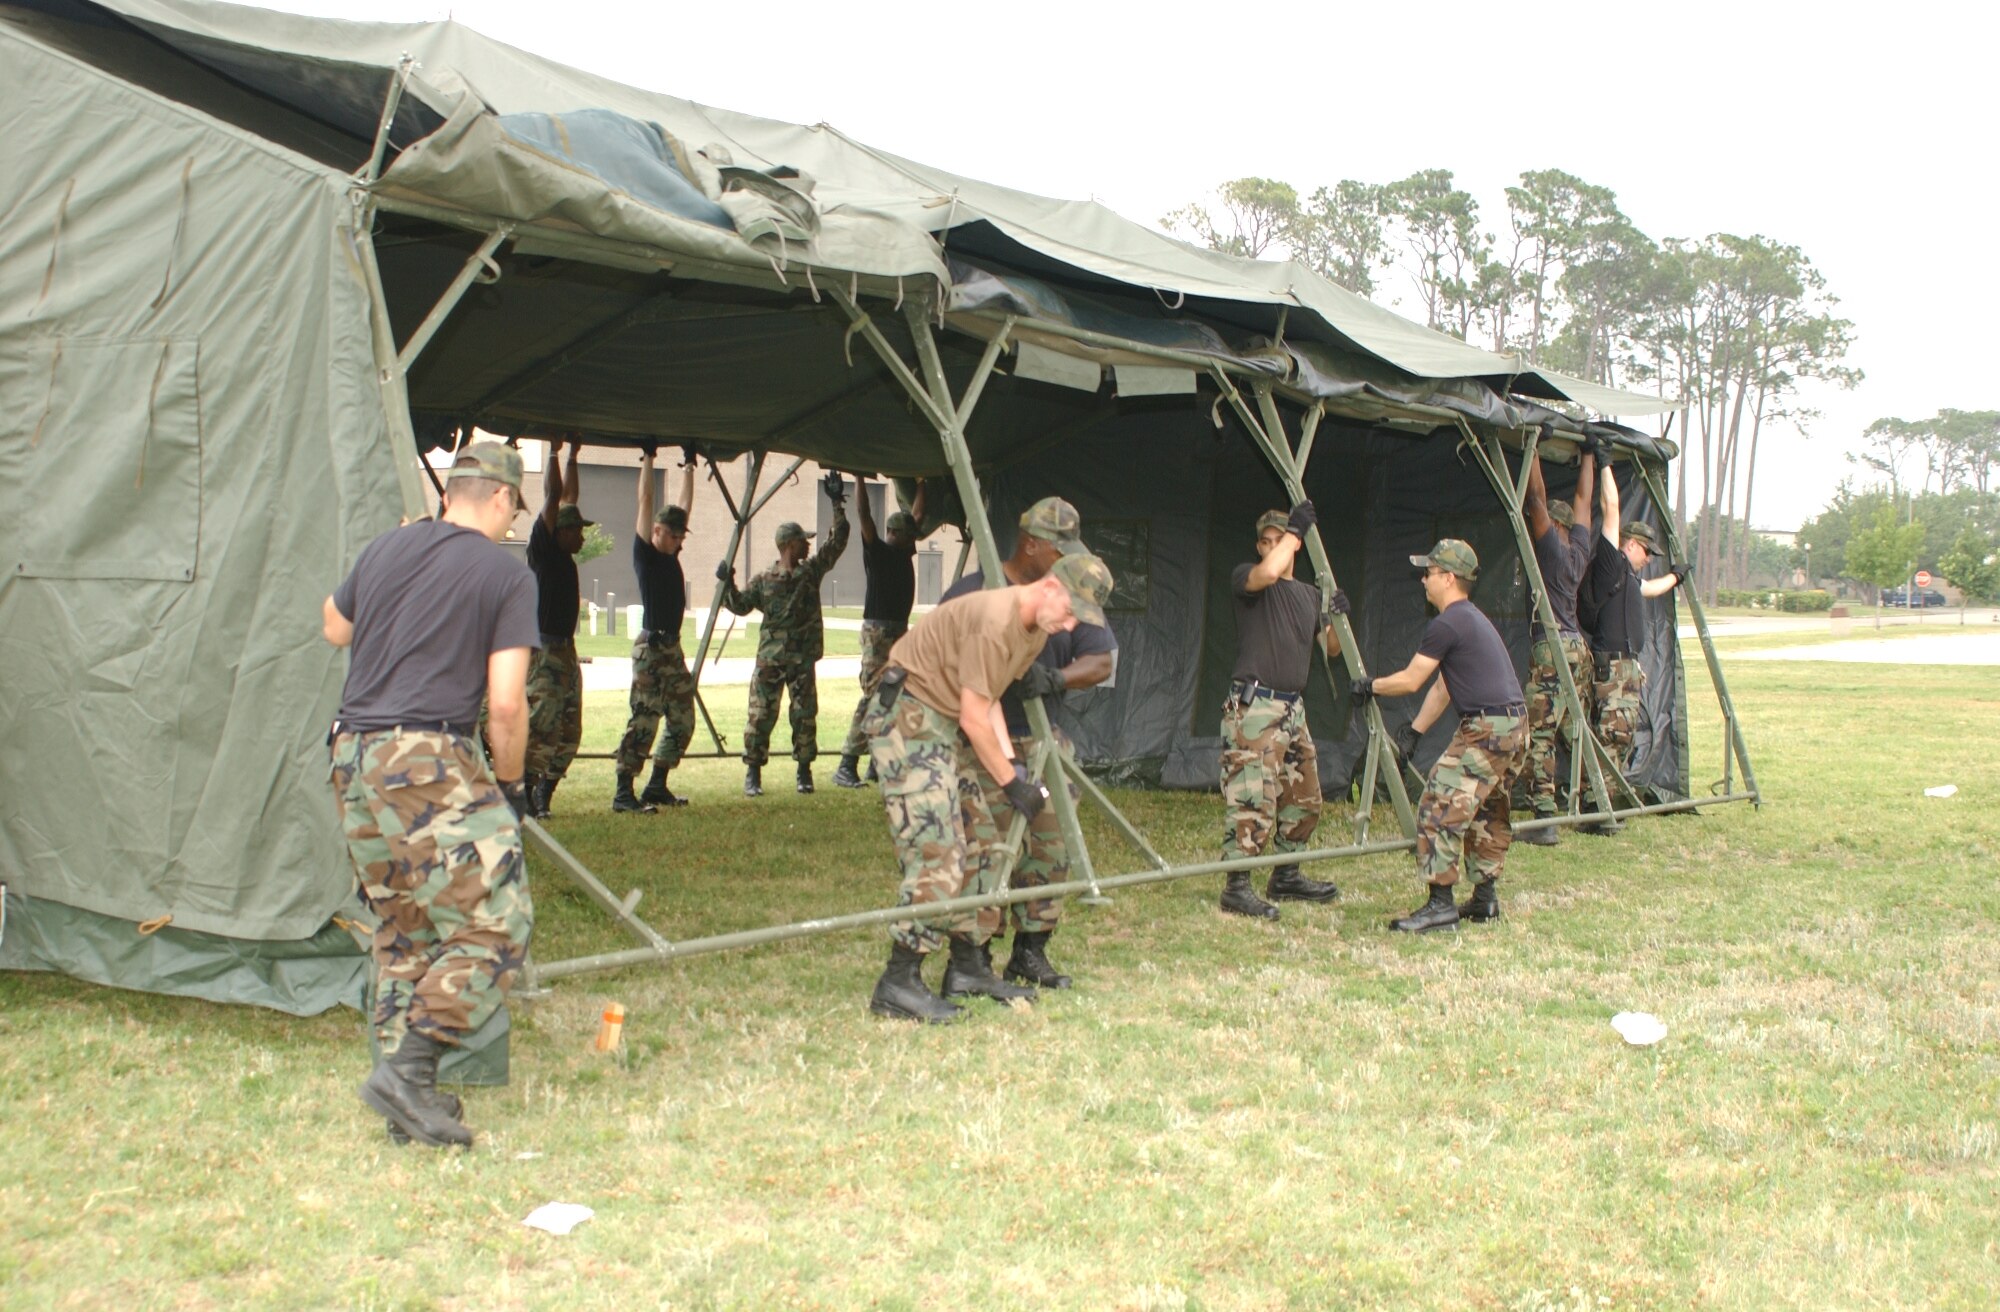 Members of the 81st Civil Engineer Squadron and 81st Services Division assemble 10 temper tents May 15 for next week’s exercise. (U. S. Air Force photo by Kemberly Groue)